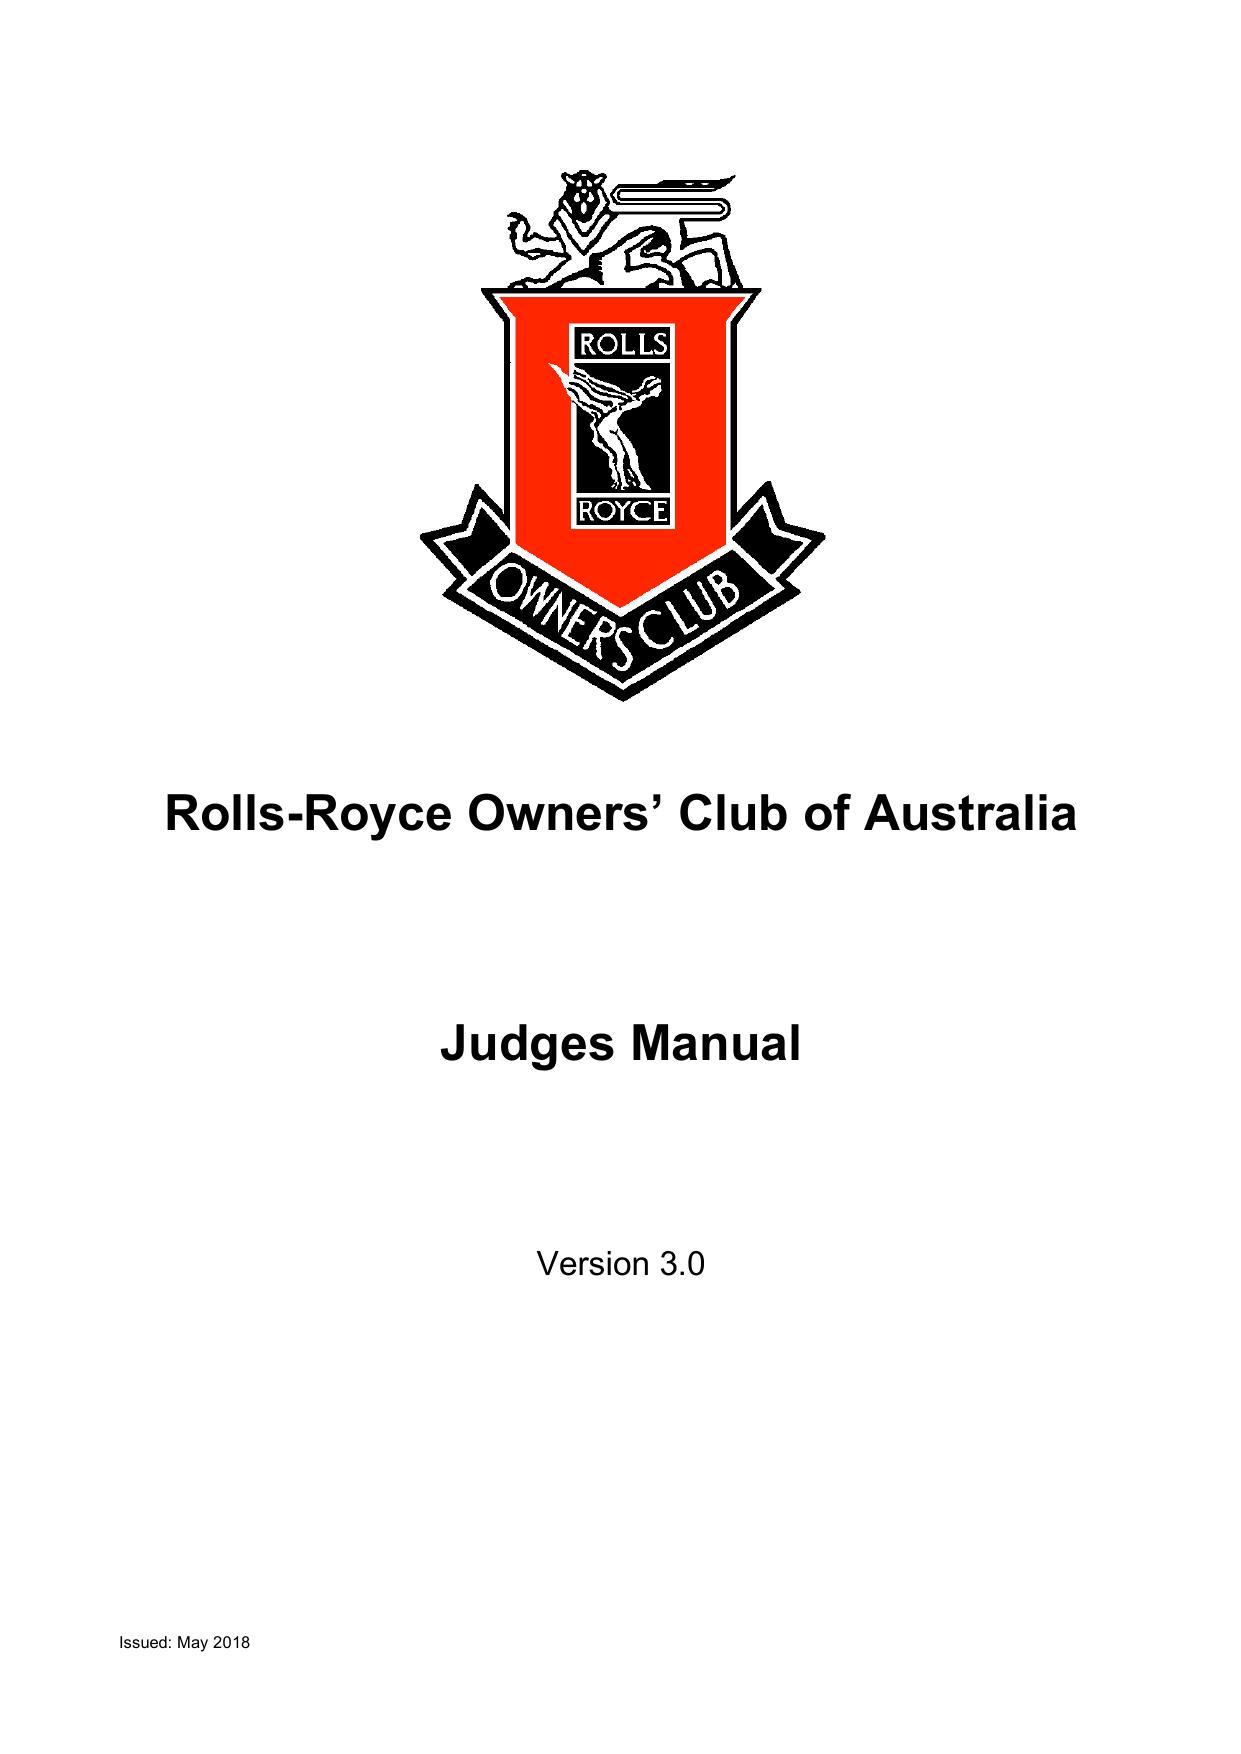 concours-judges-manual-version-30-dated-may-2018.pdf